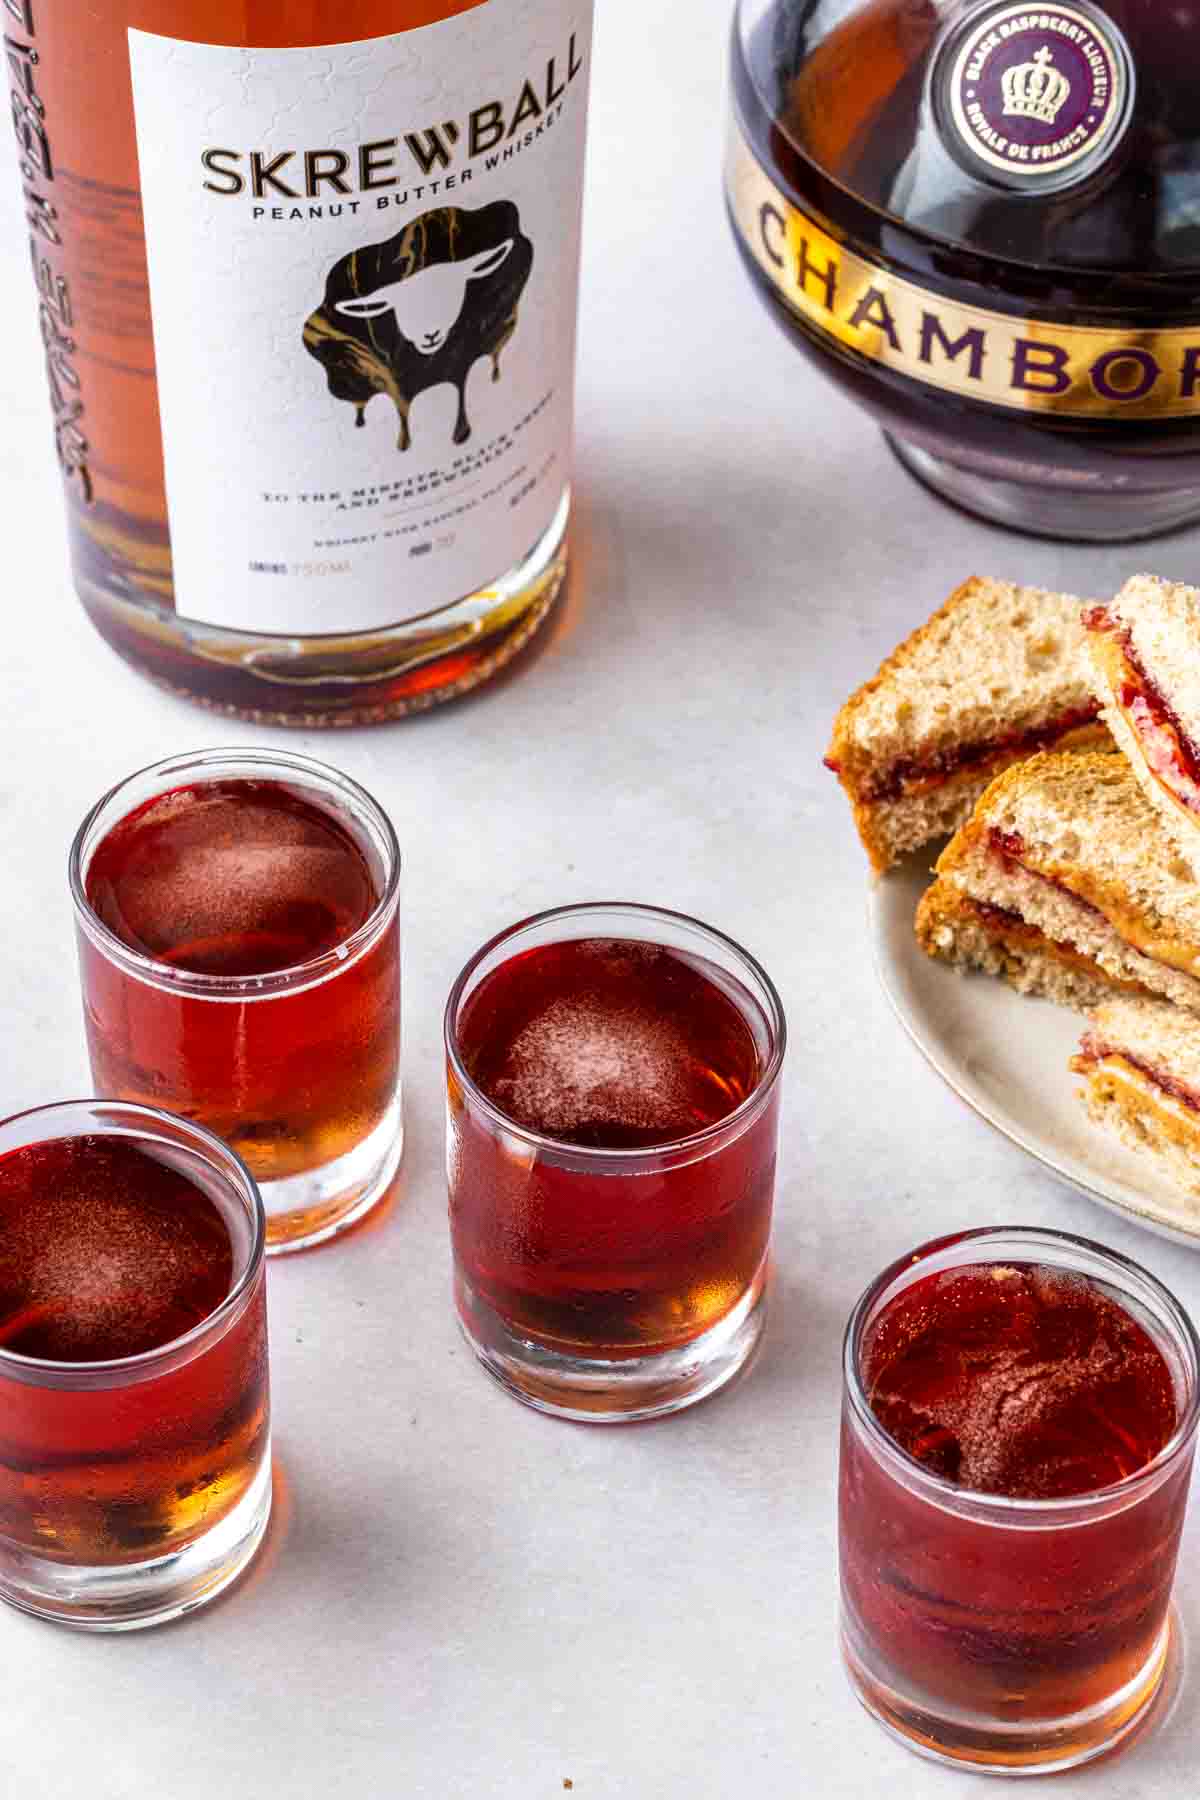 A bottle of screwball whiskey and chambord next to shots and a plate of mini pb and j sandwiches. 